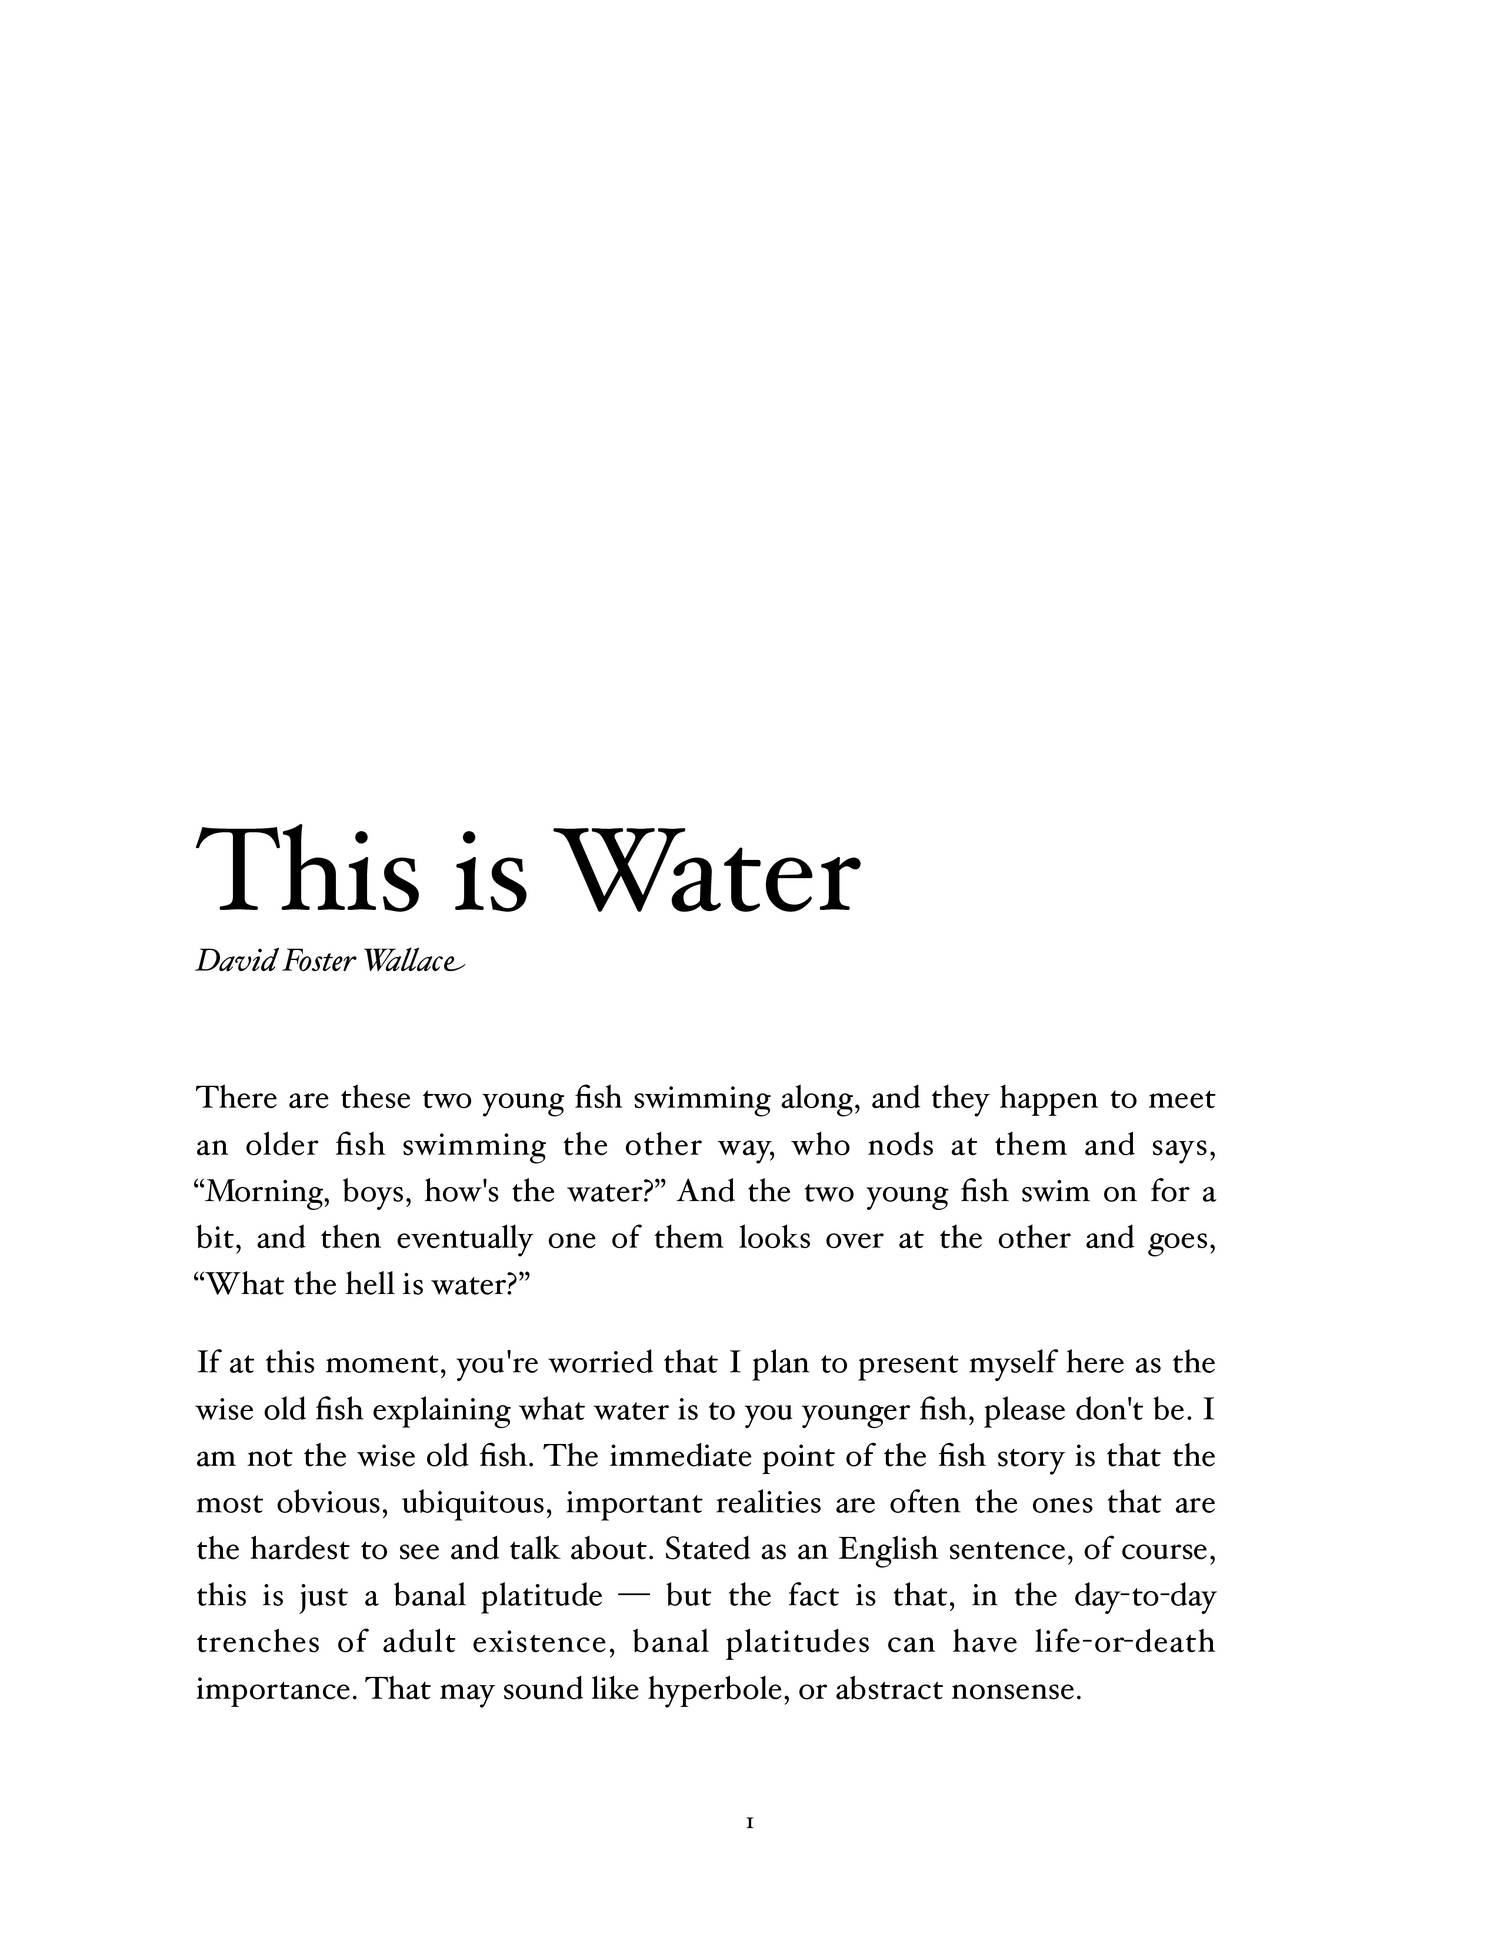 This Is Water Speech Text